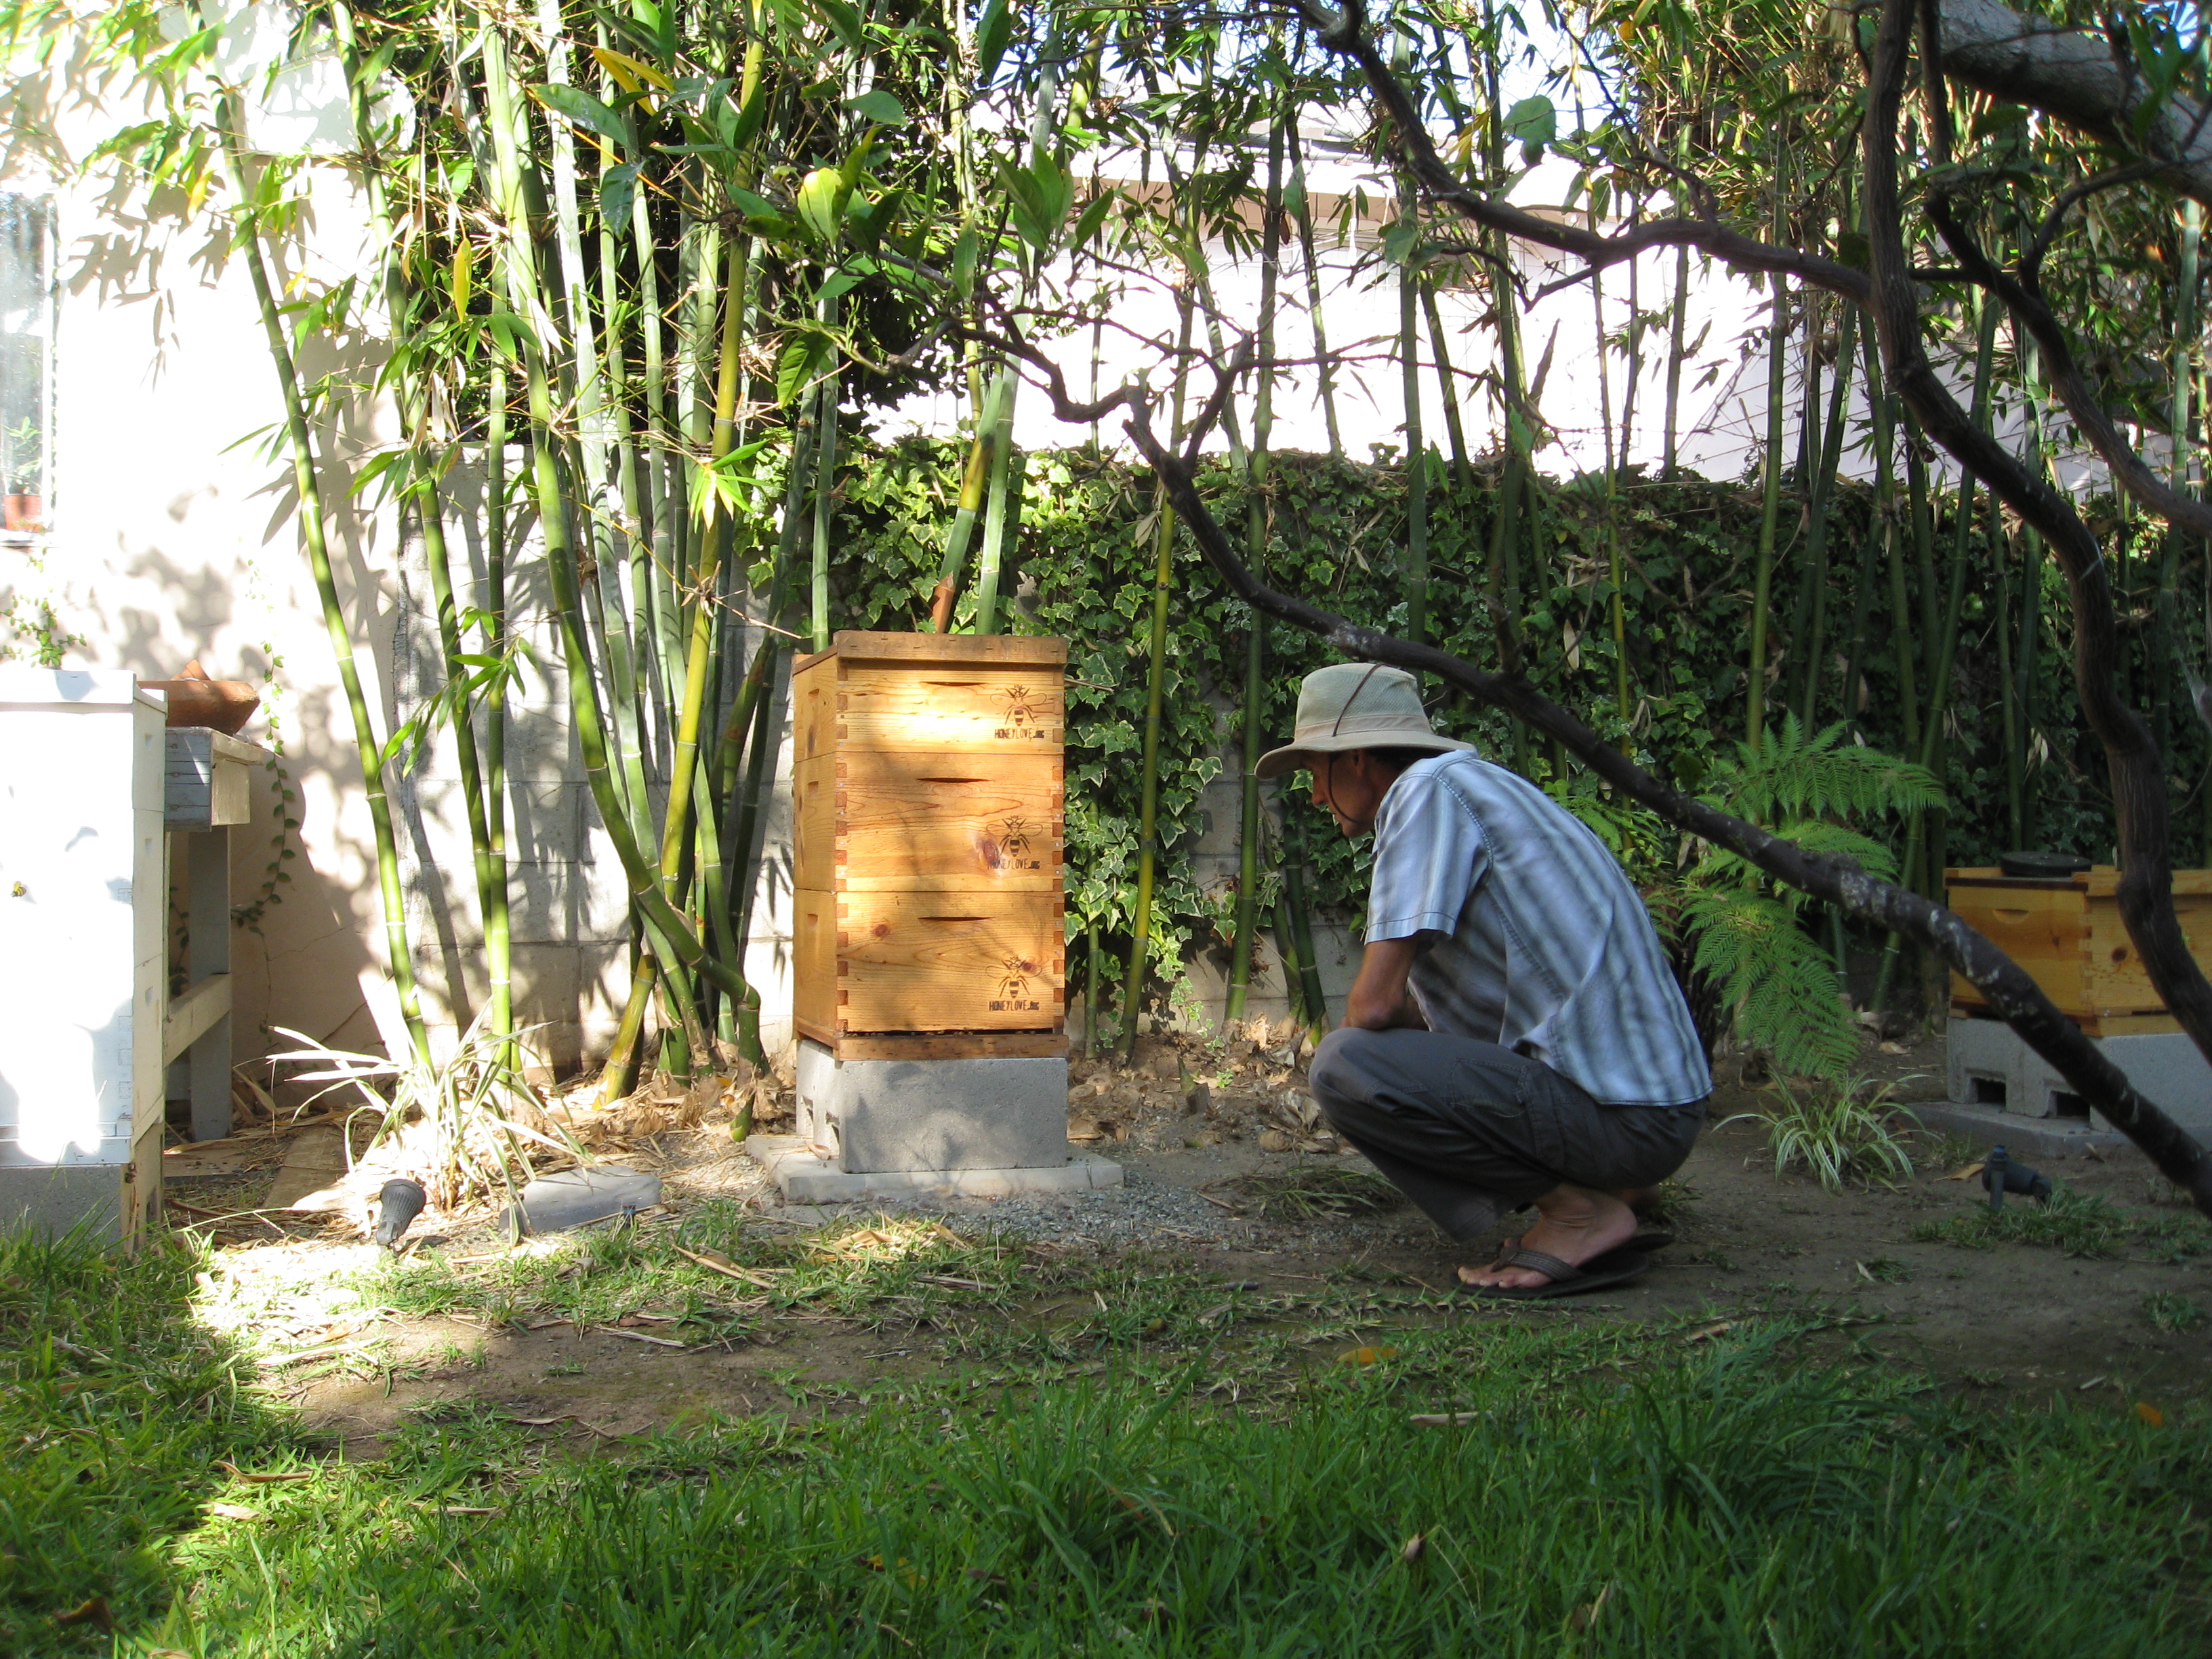 Michael approaches a hive to observe